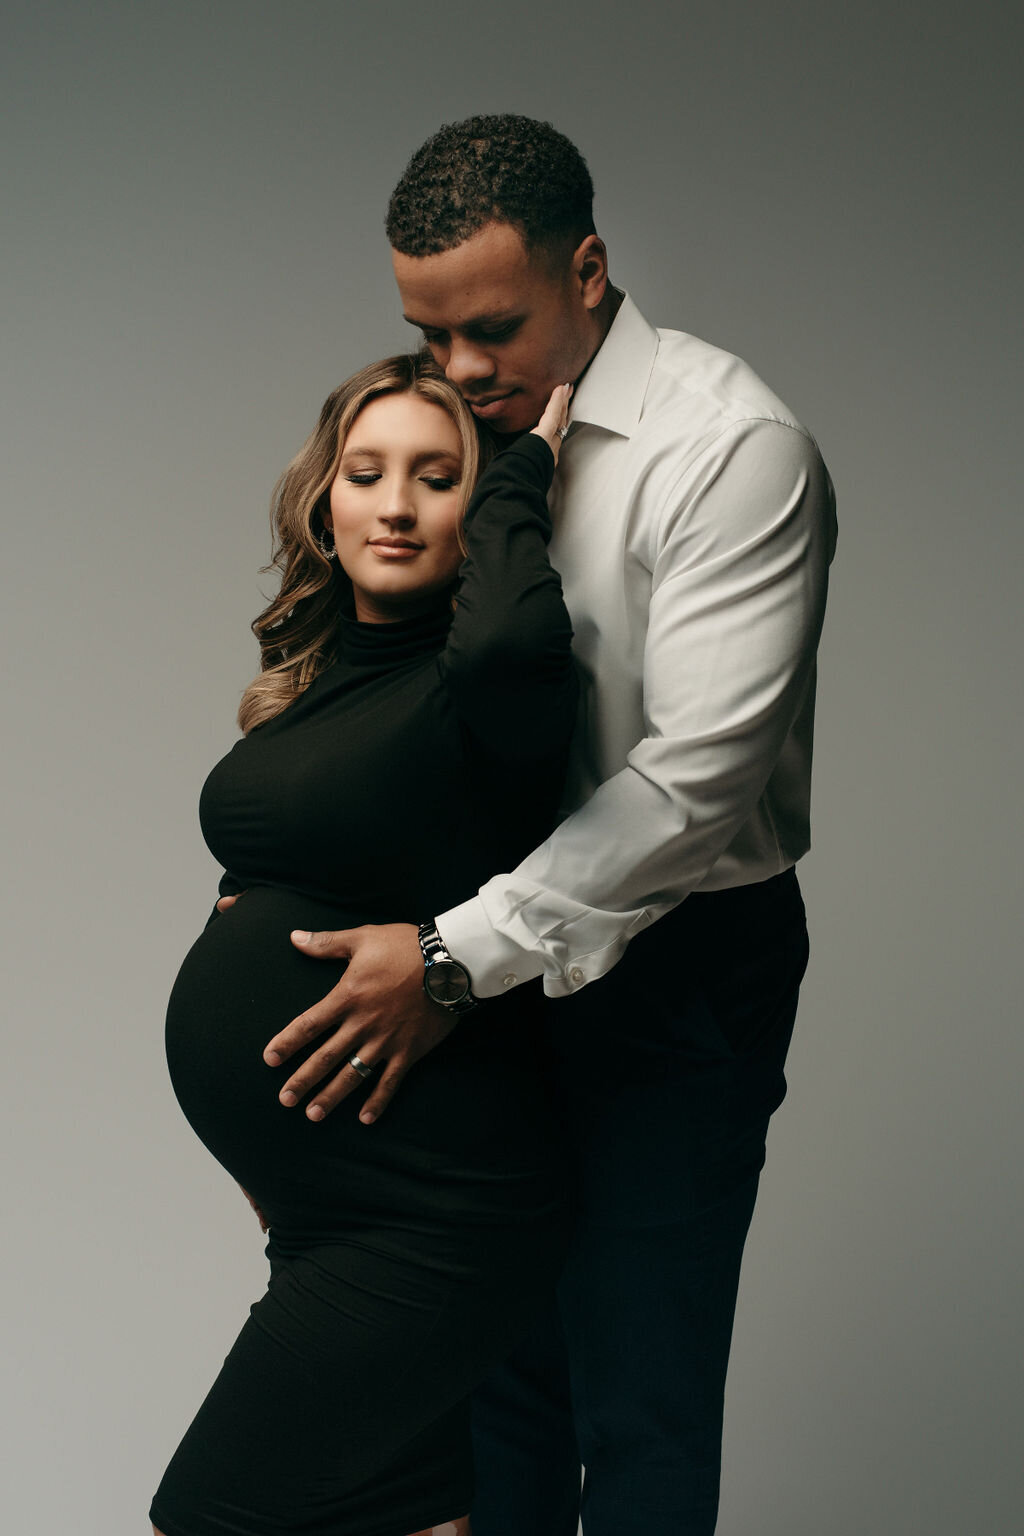 Man and woman posing for maternity portrait with man standing behind woman holding her baby bump